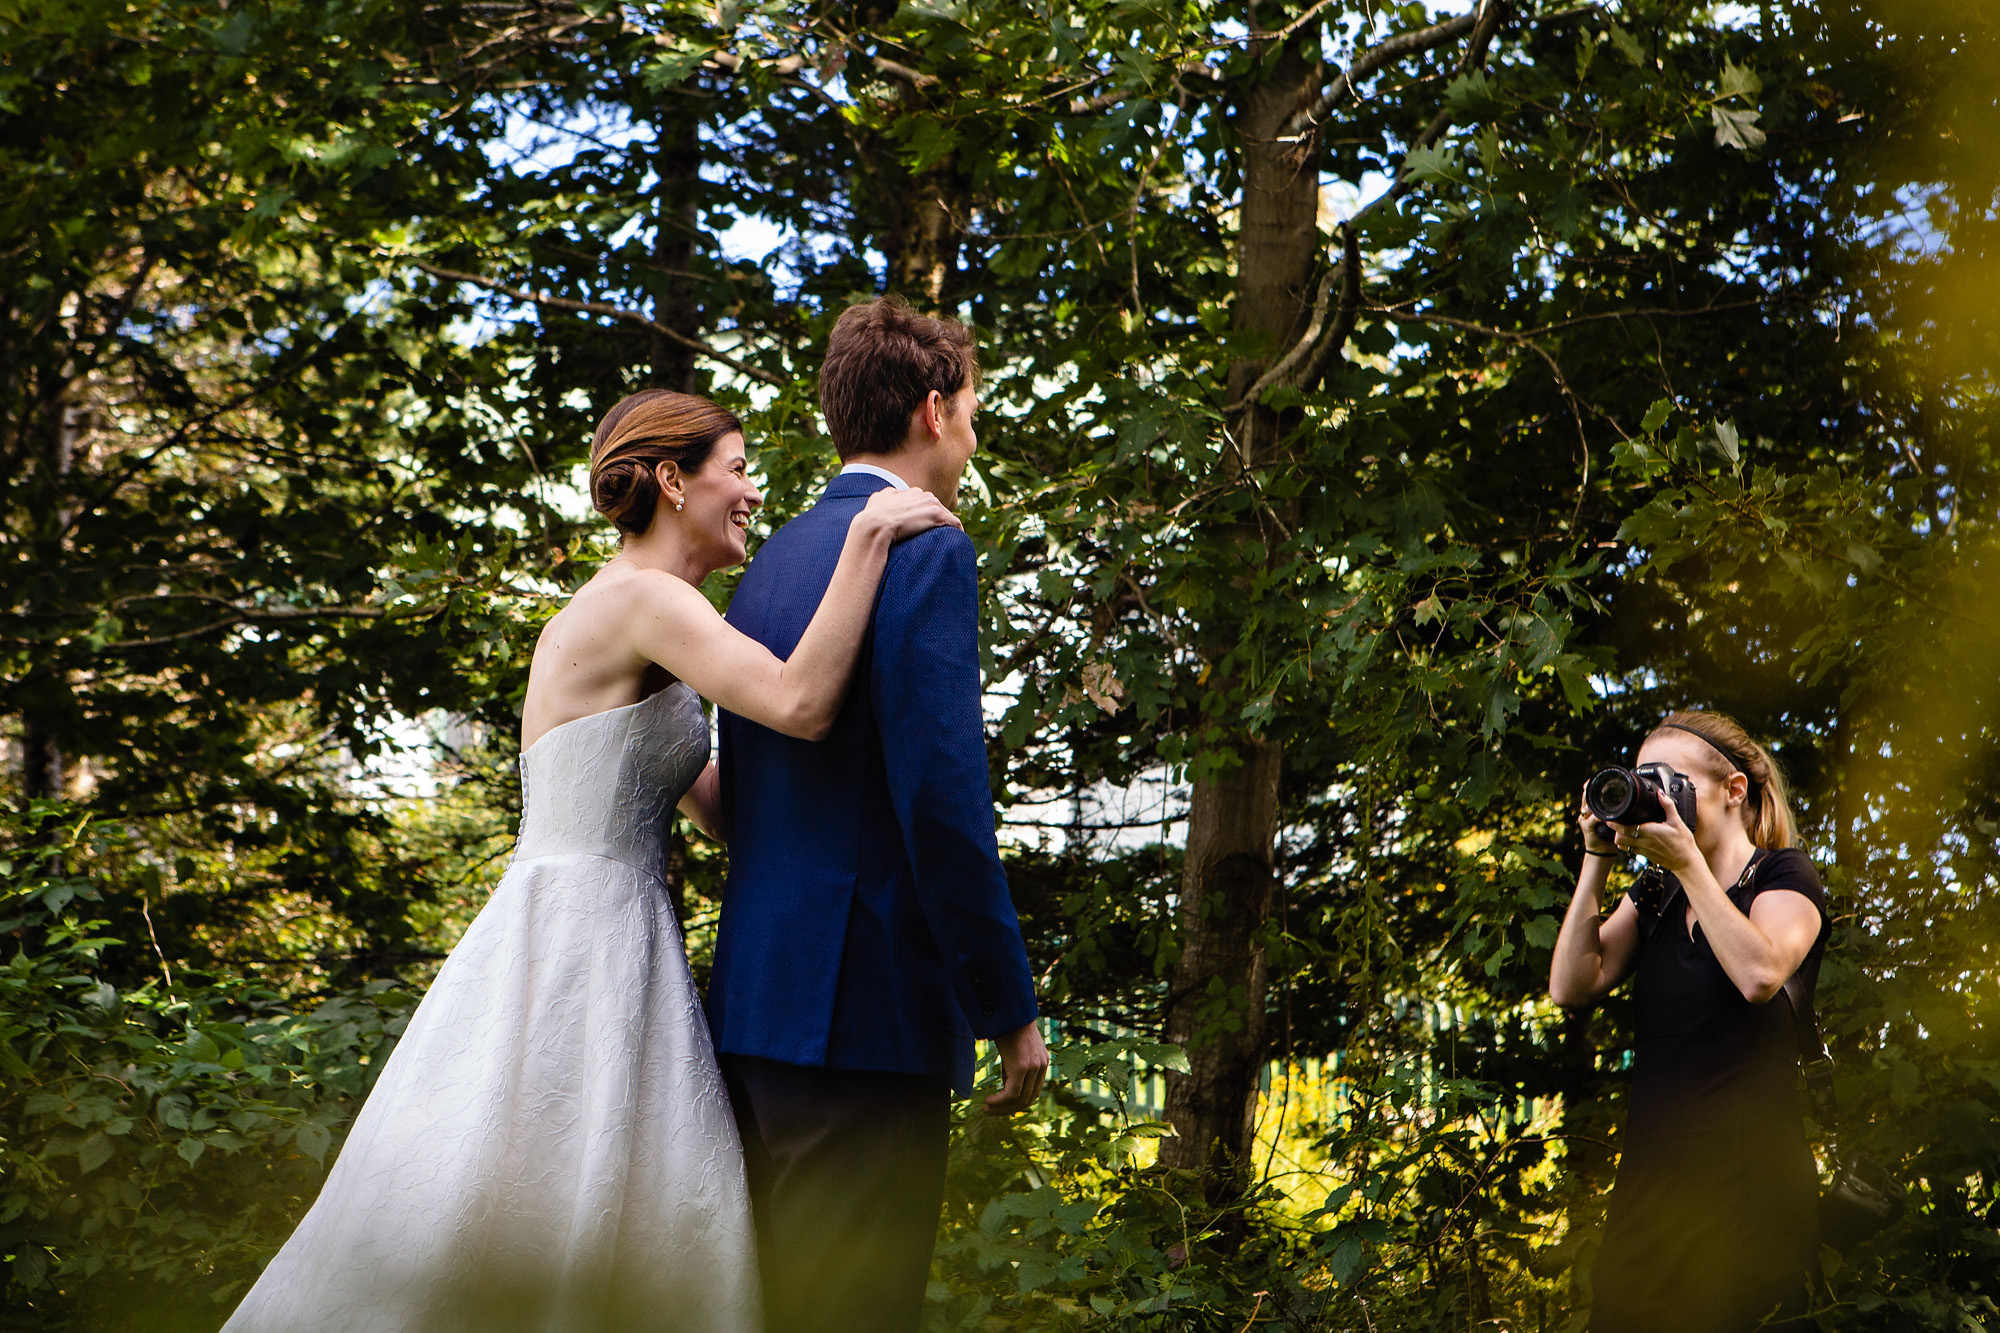 Behind the scenes photos of Kate Crabtree, a Maine wedding photographer